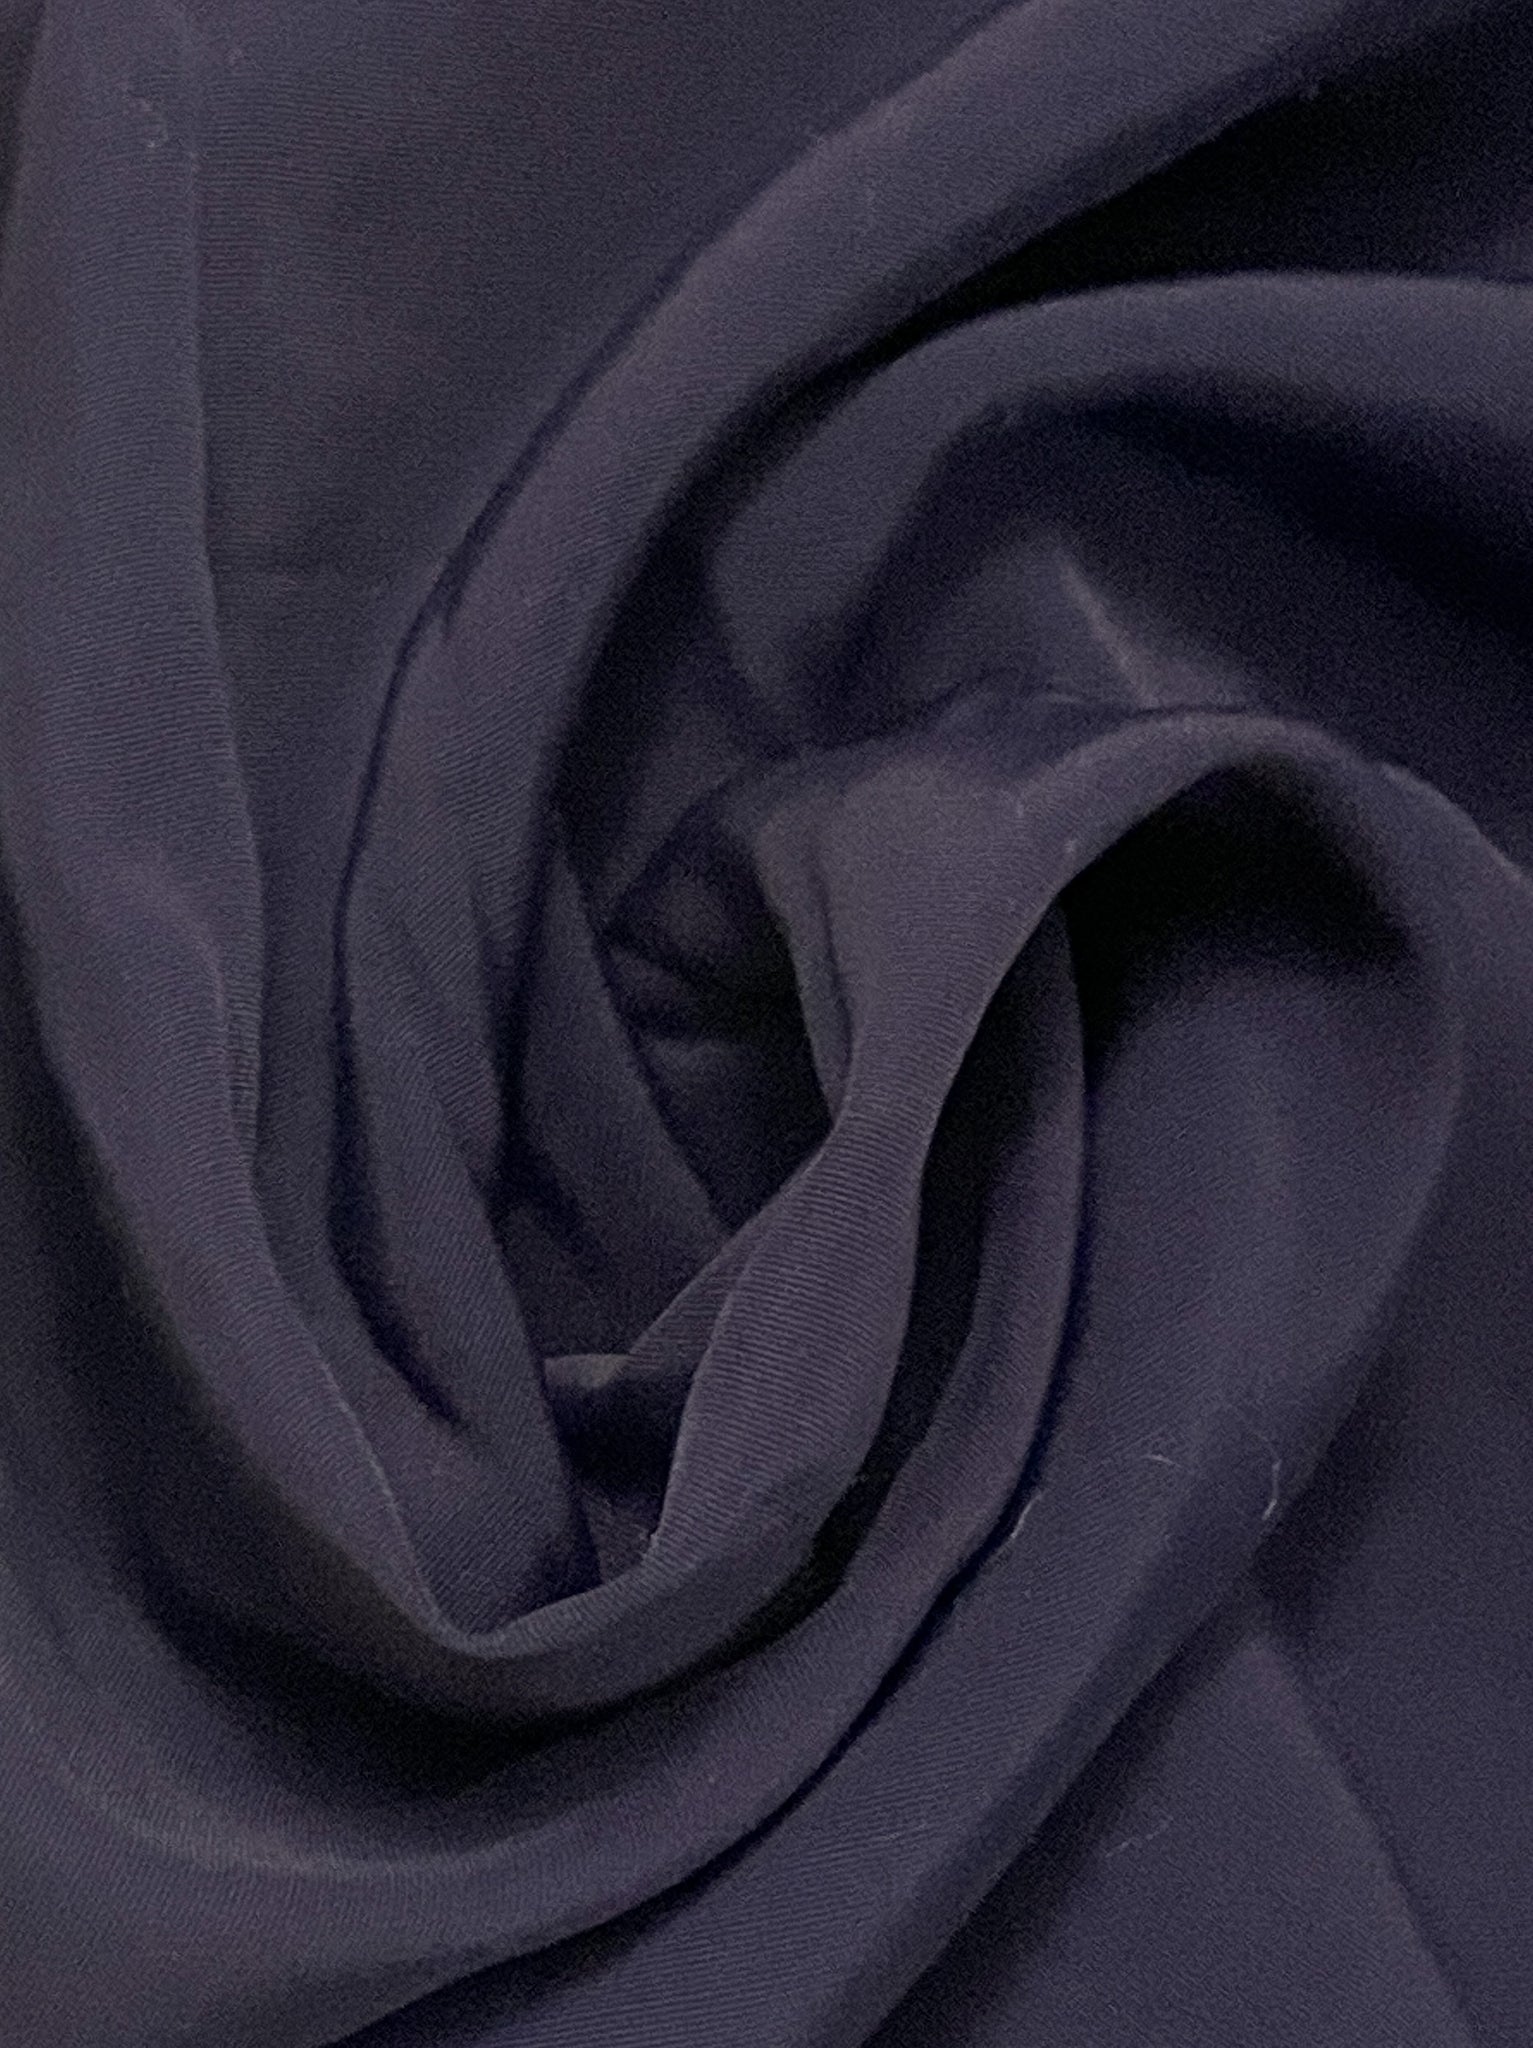 SALE 1 7/8 YD Polyester - Navy Blue